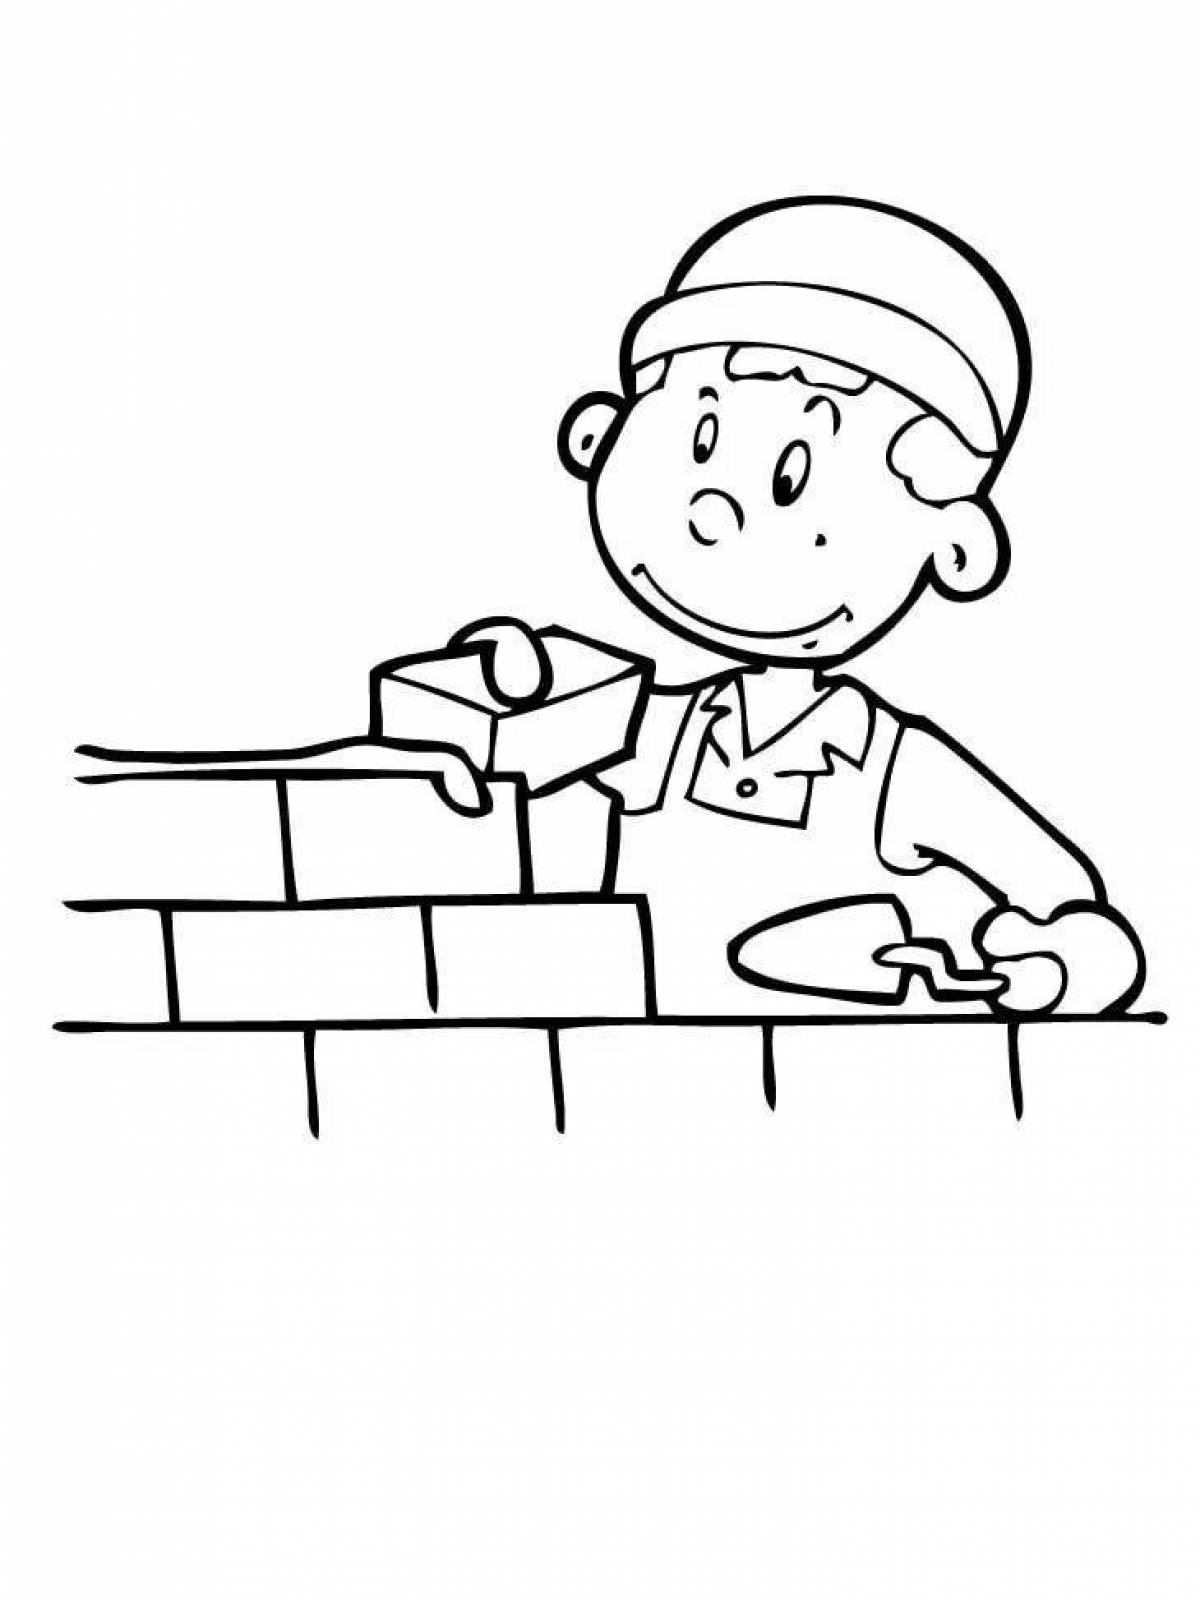 A fun coloring book for kids professions